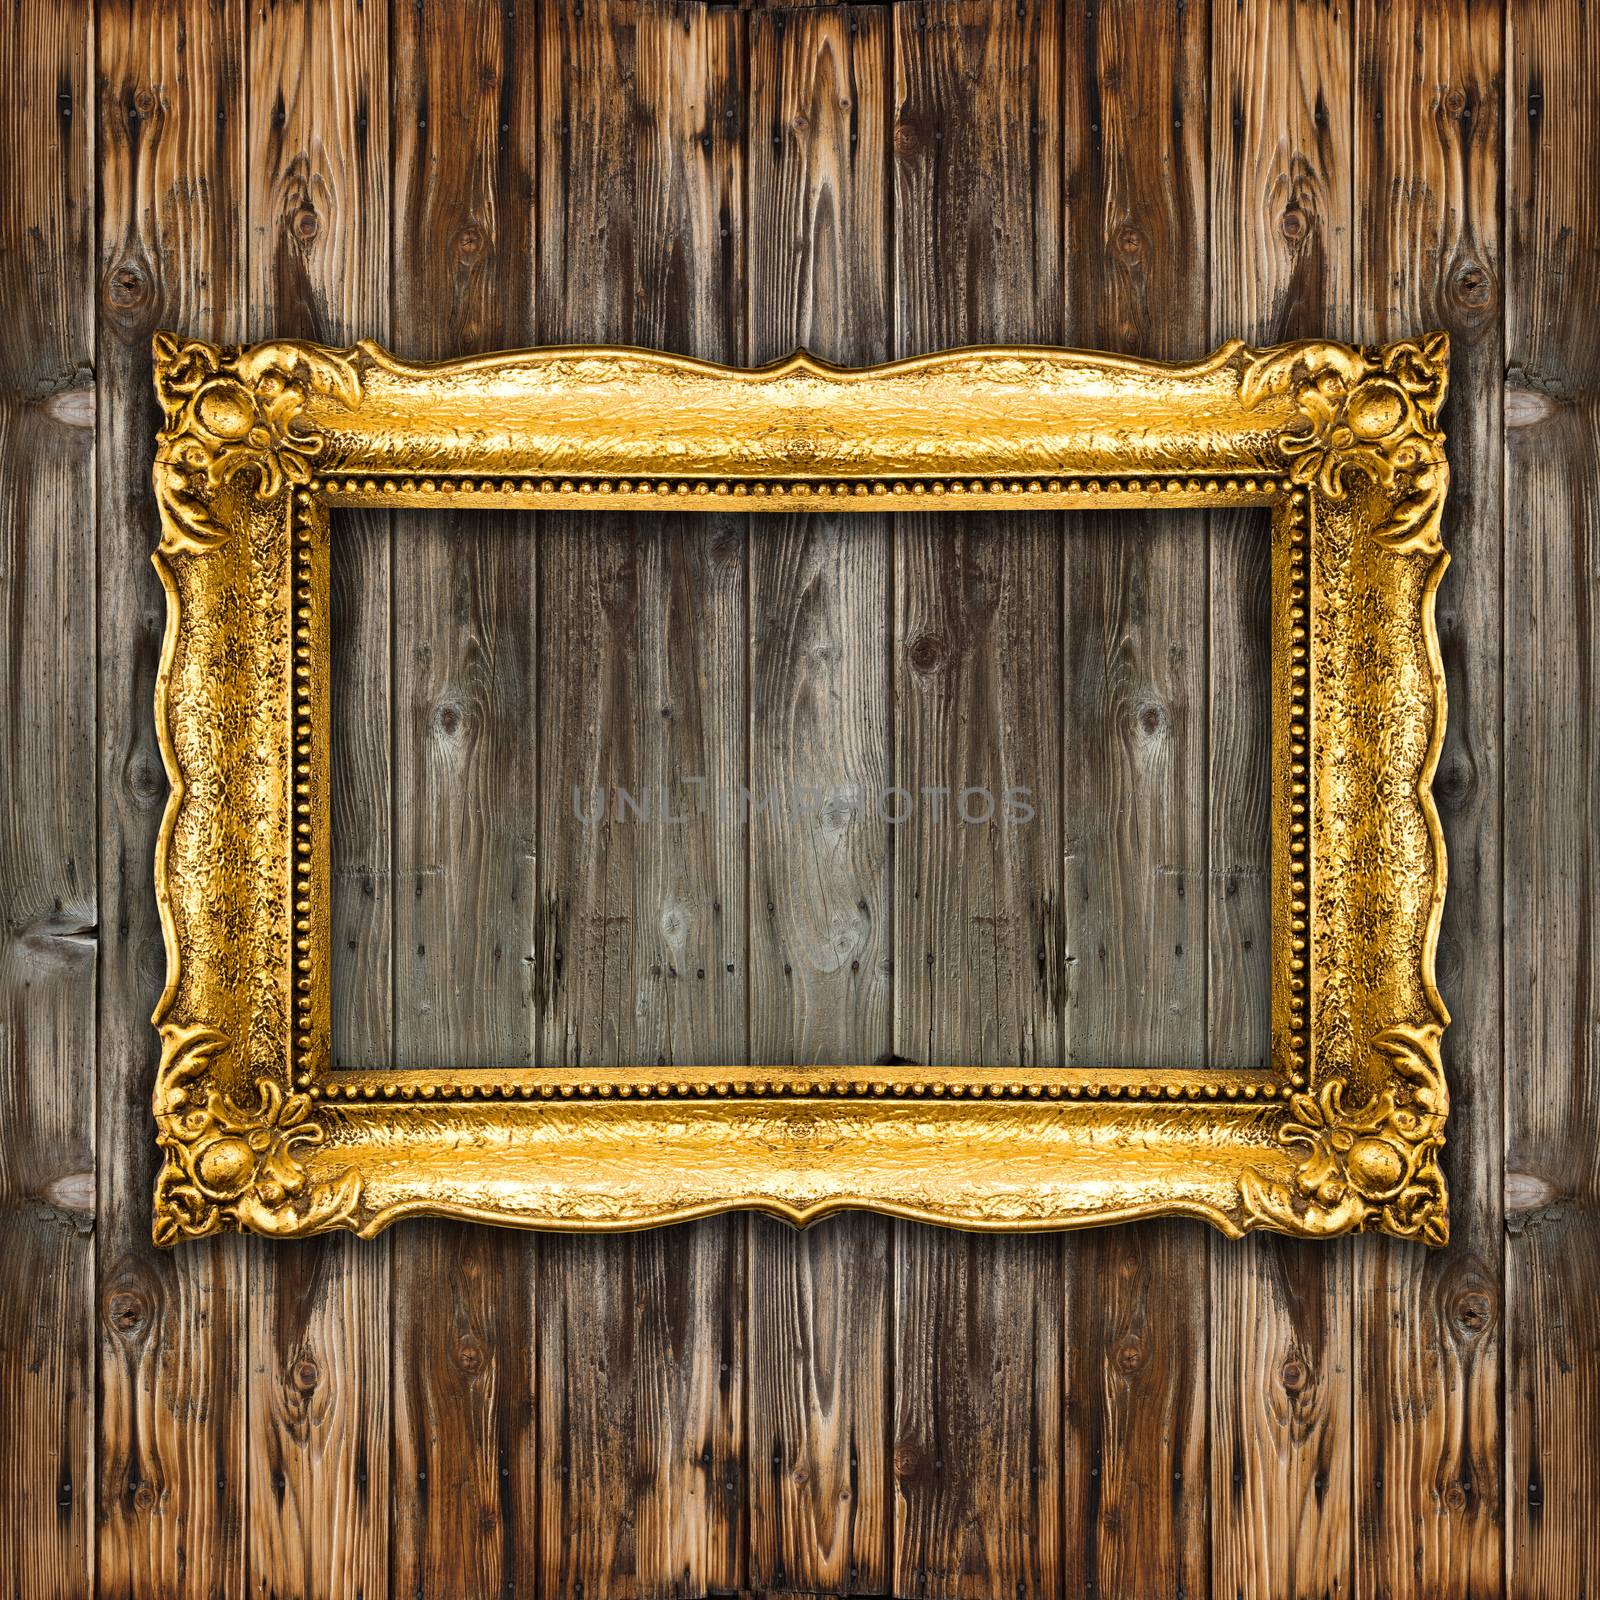 Big Old Picture Frame on wooden baclground